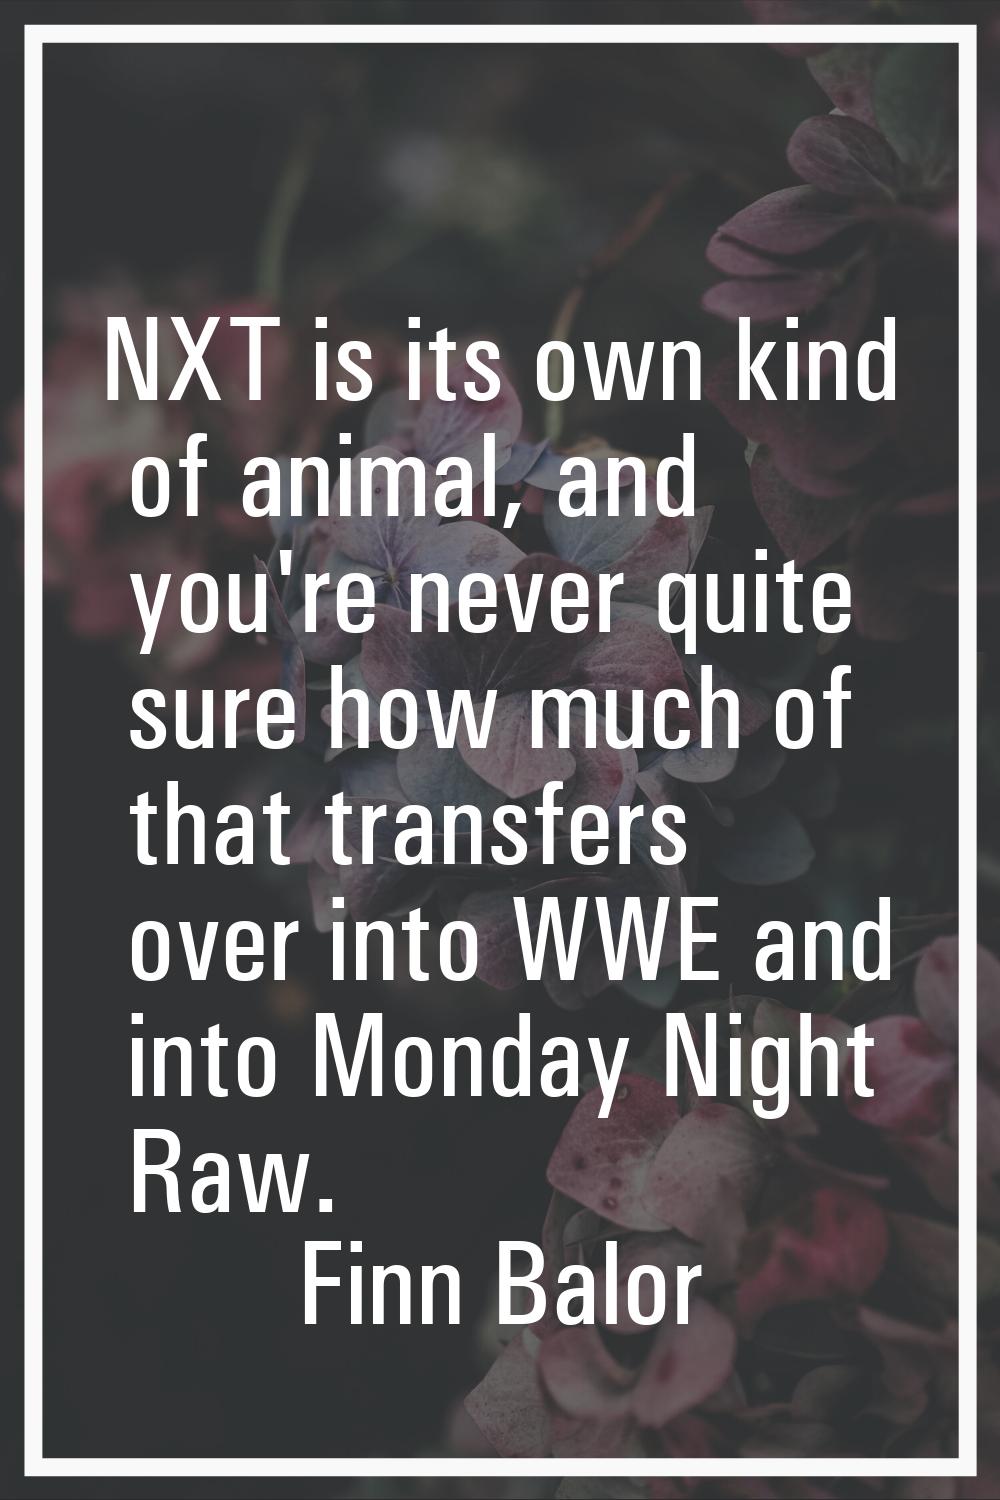 NXT is its own kind of animal, and you're never quite sure how much of that transfers over into WWE